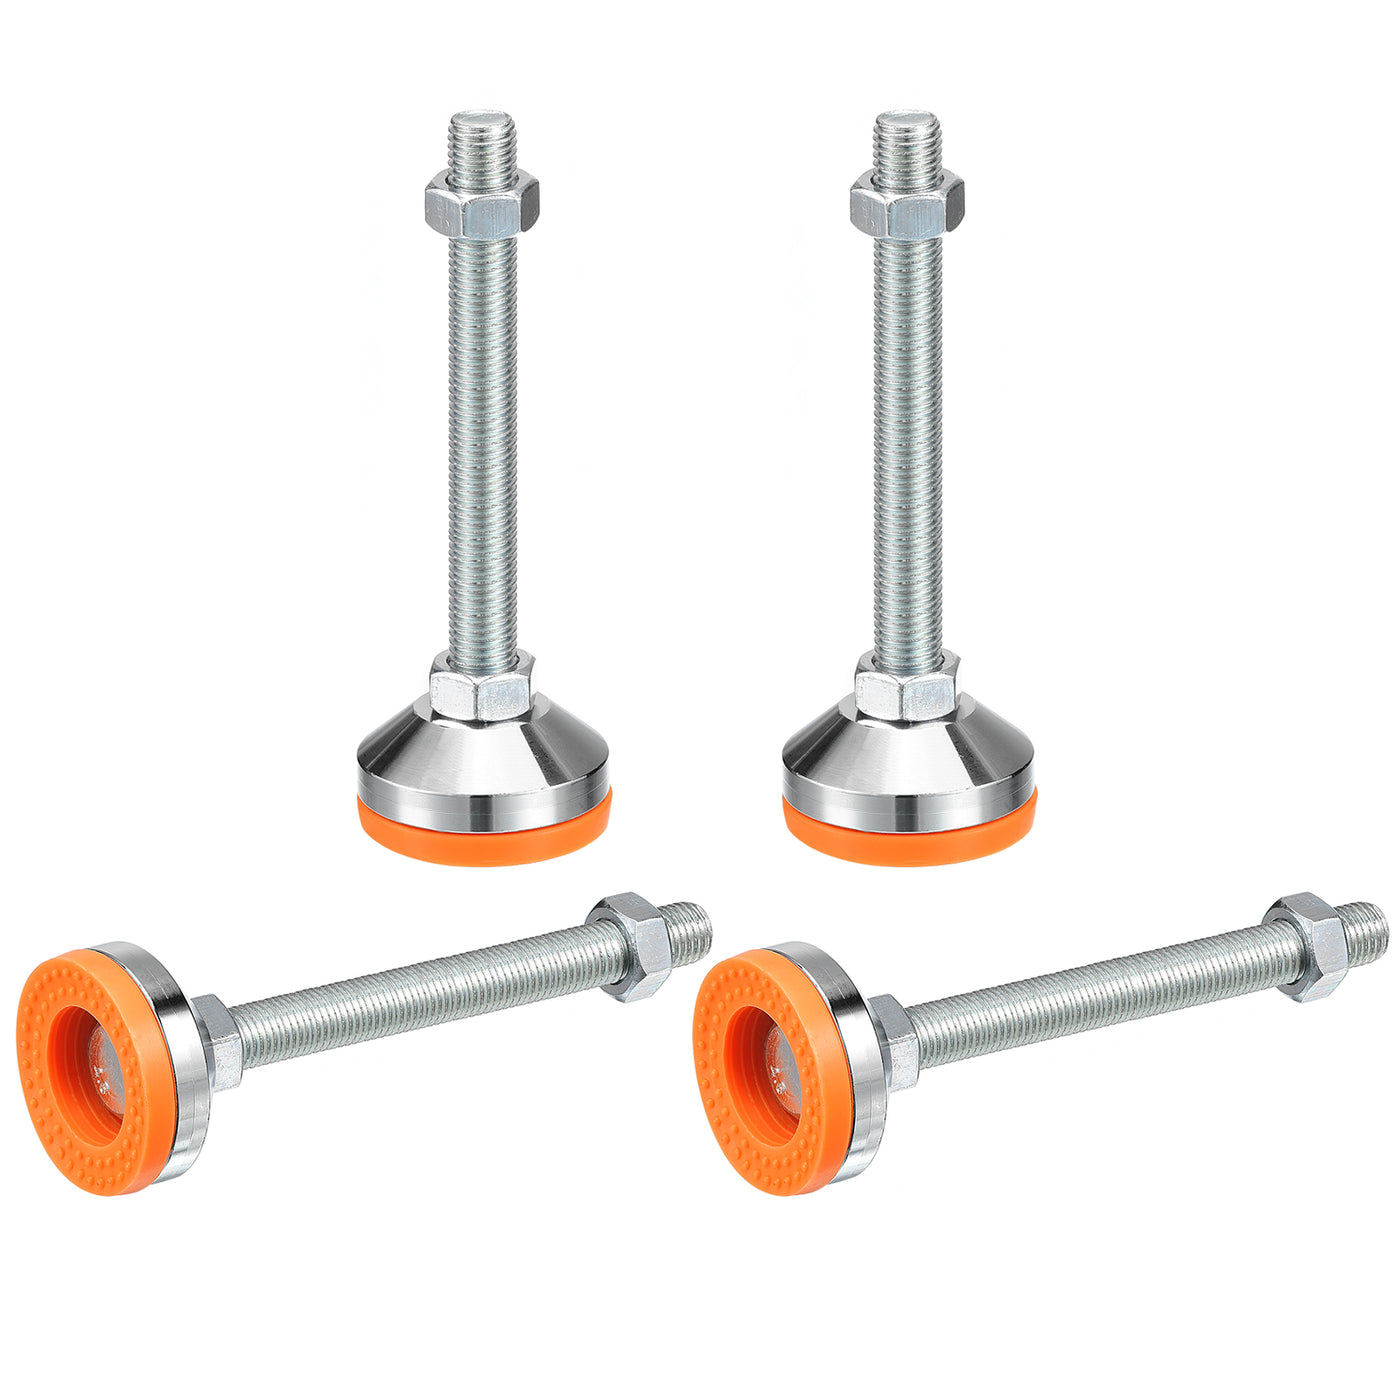 uxcell Uxcell Leveling Feet, 4Pcs M16x150x60mm - Carbon Steel Non-Skid Anti-shock Adjustable Table Feet, Leveling Screw Leg for Furniture Workshops Equipment